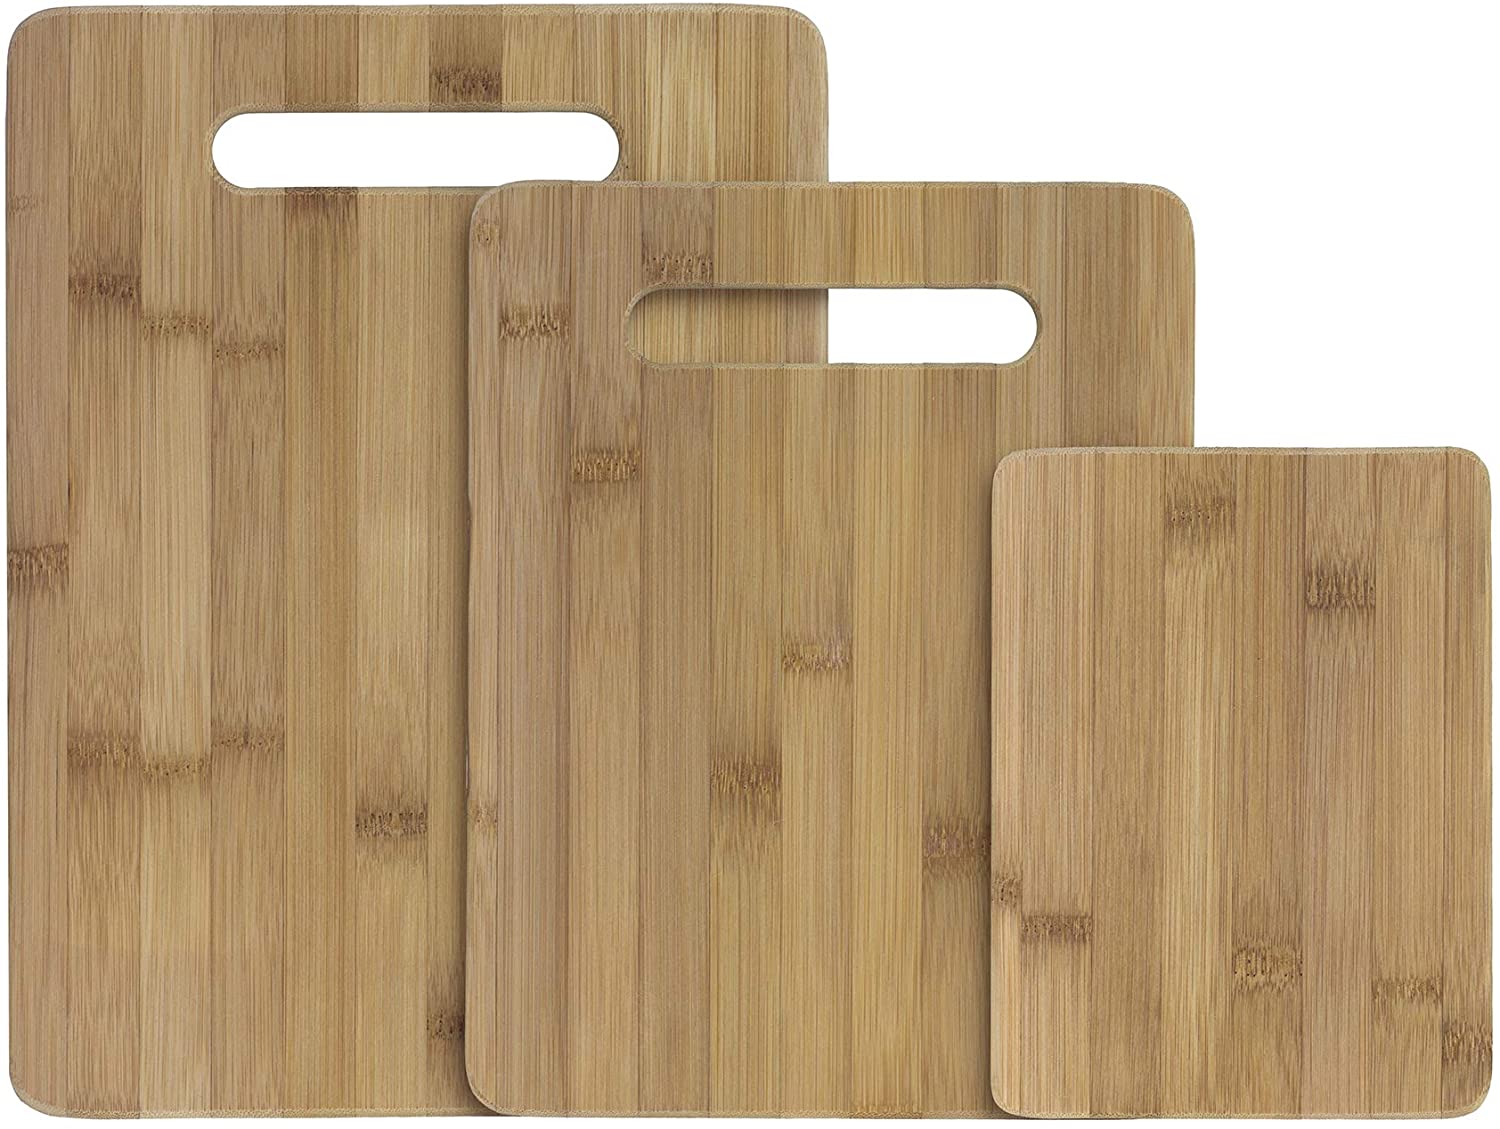 Totally Bamboo 3-Piece Bamboo Serving and Cutting Board Set